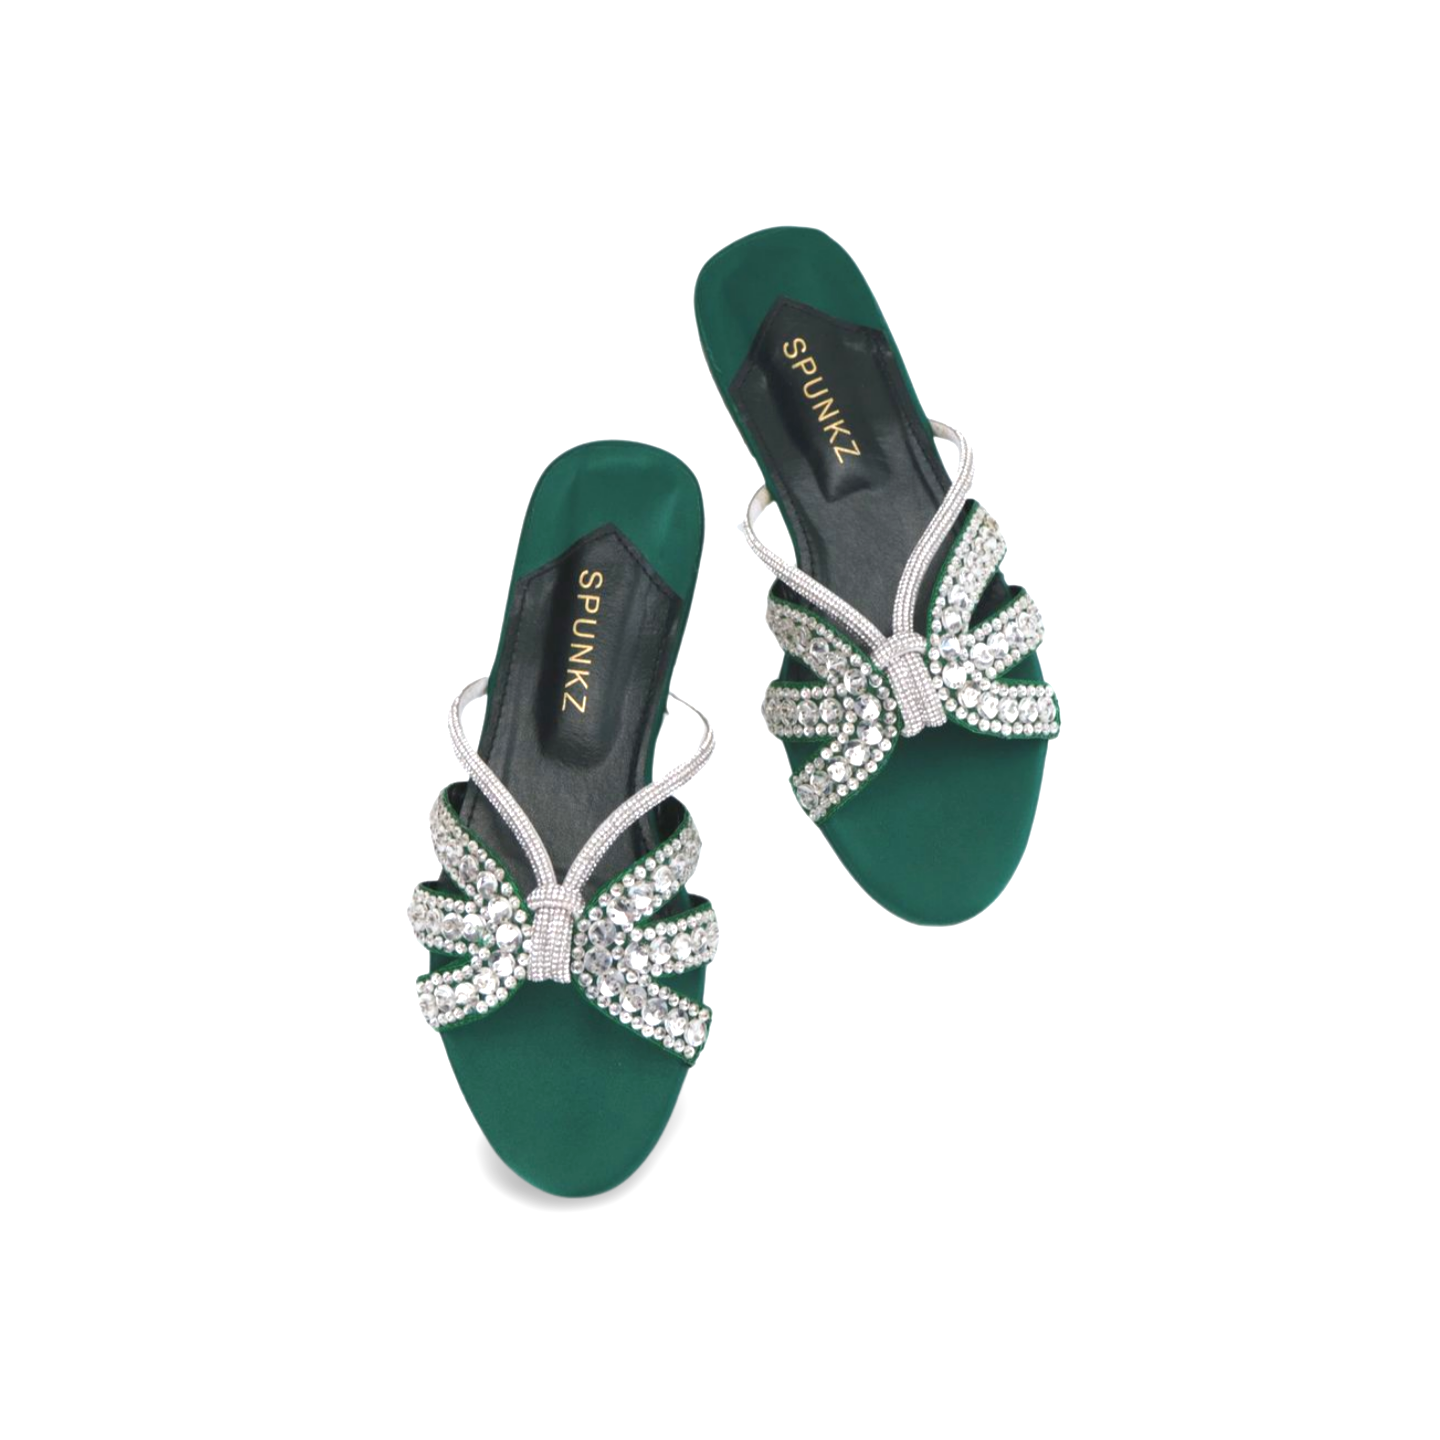 Rhinestone Strap Flat Sandals - Stylish and Comfortable for Any Occasion